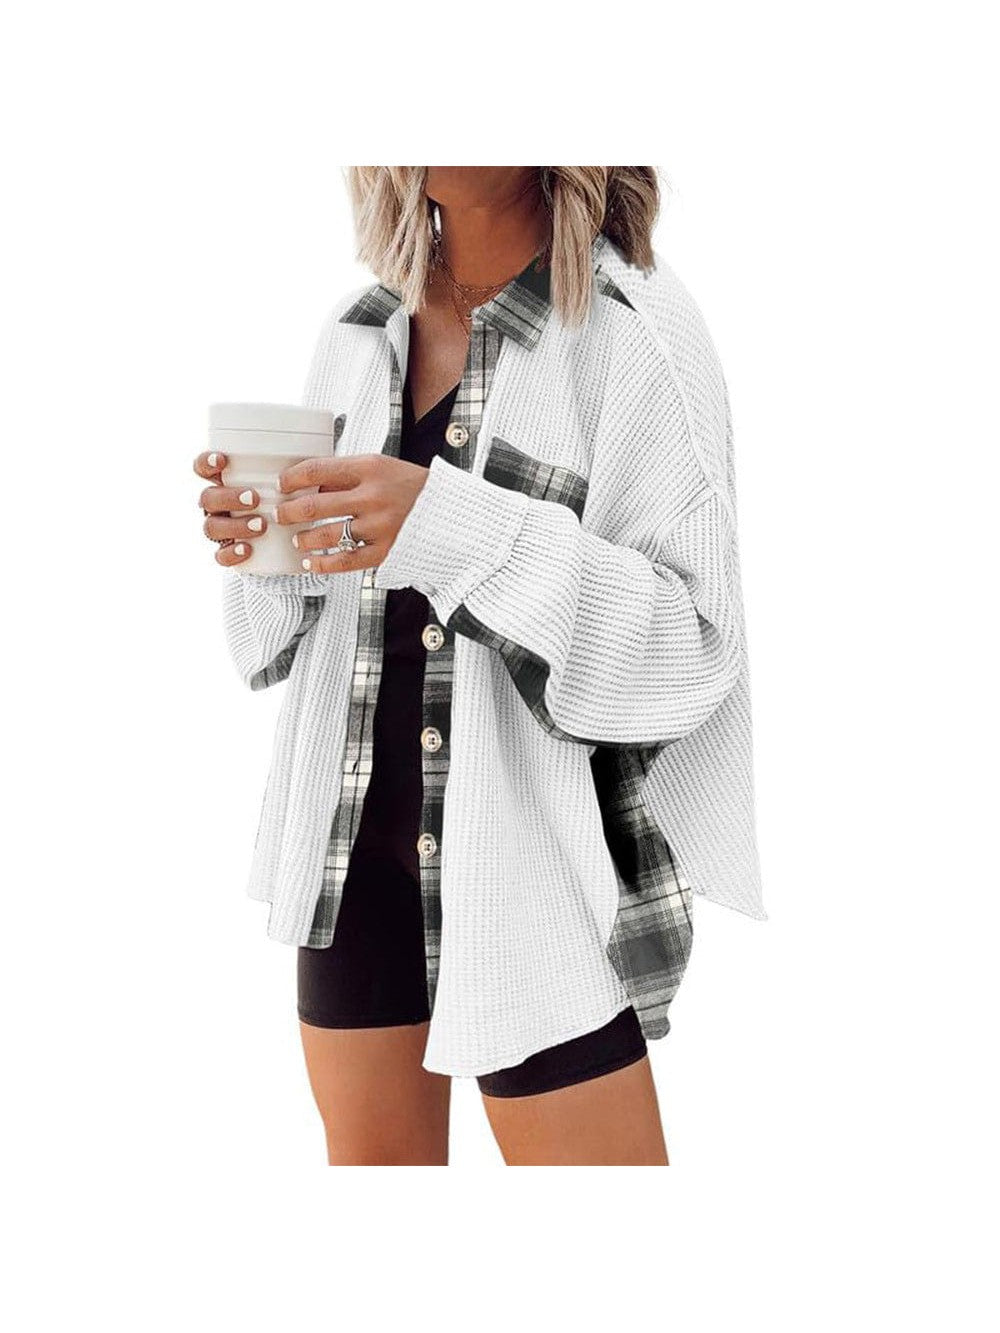 Casual women's checked boyfriend shirt with loose casual waffle knit jacket